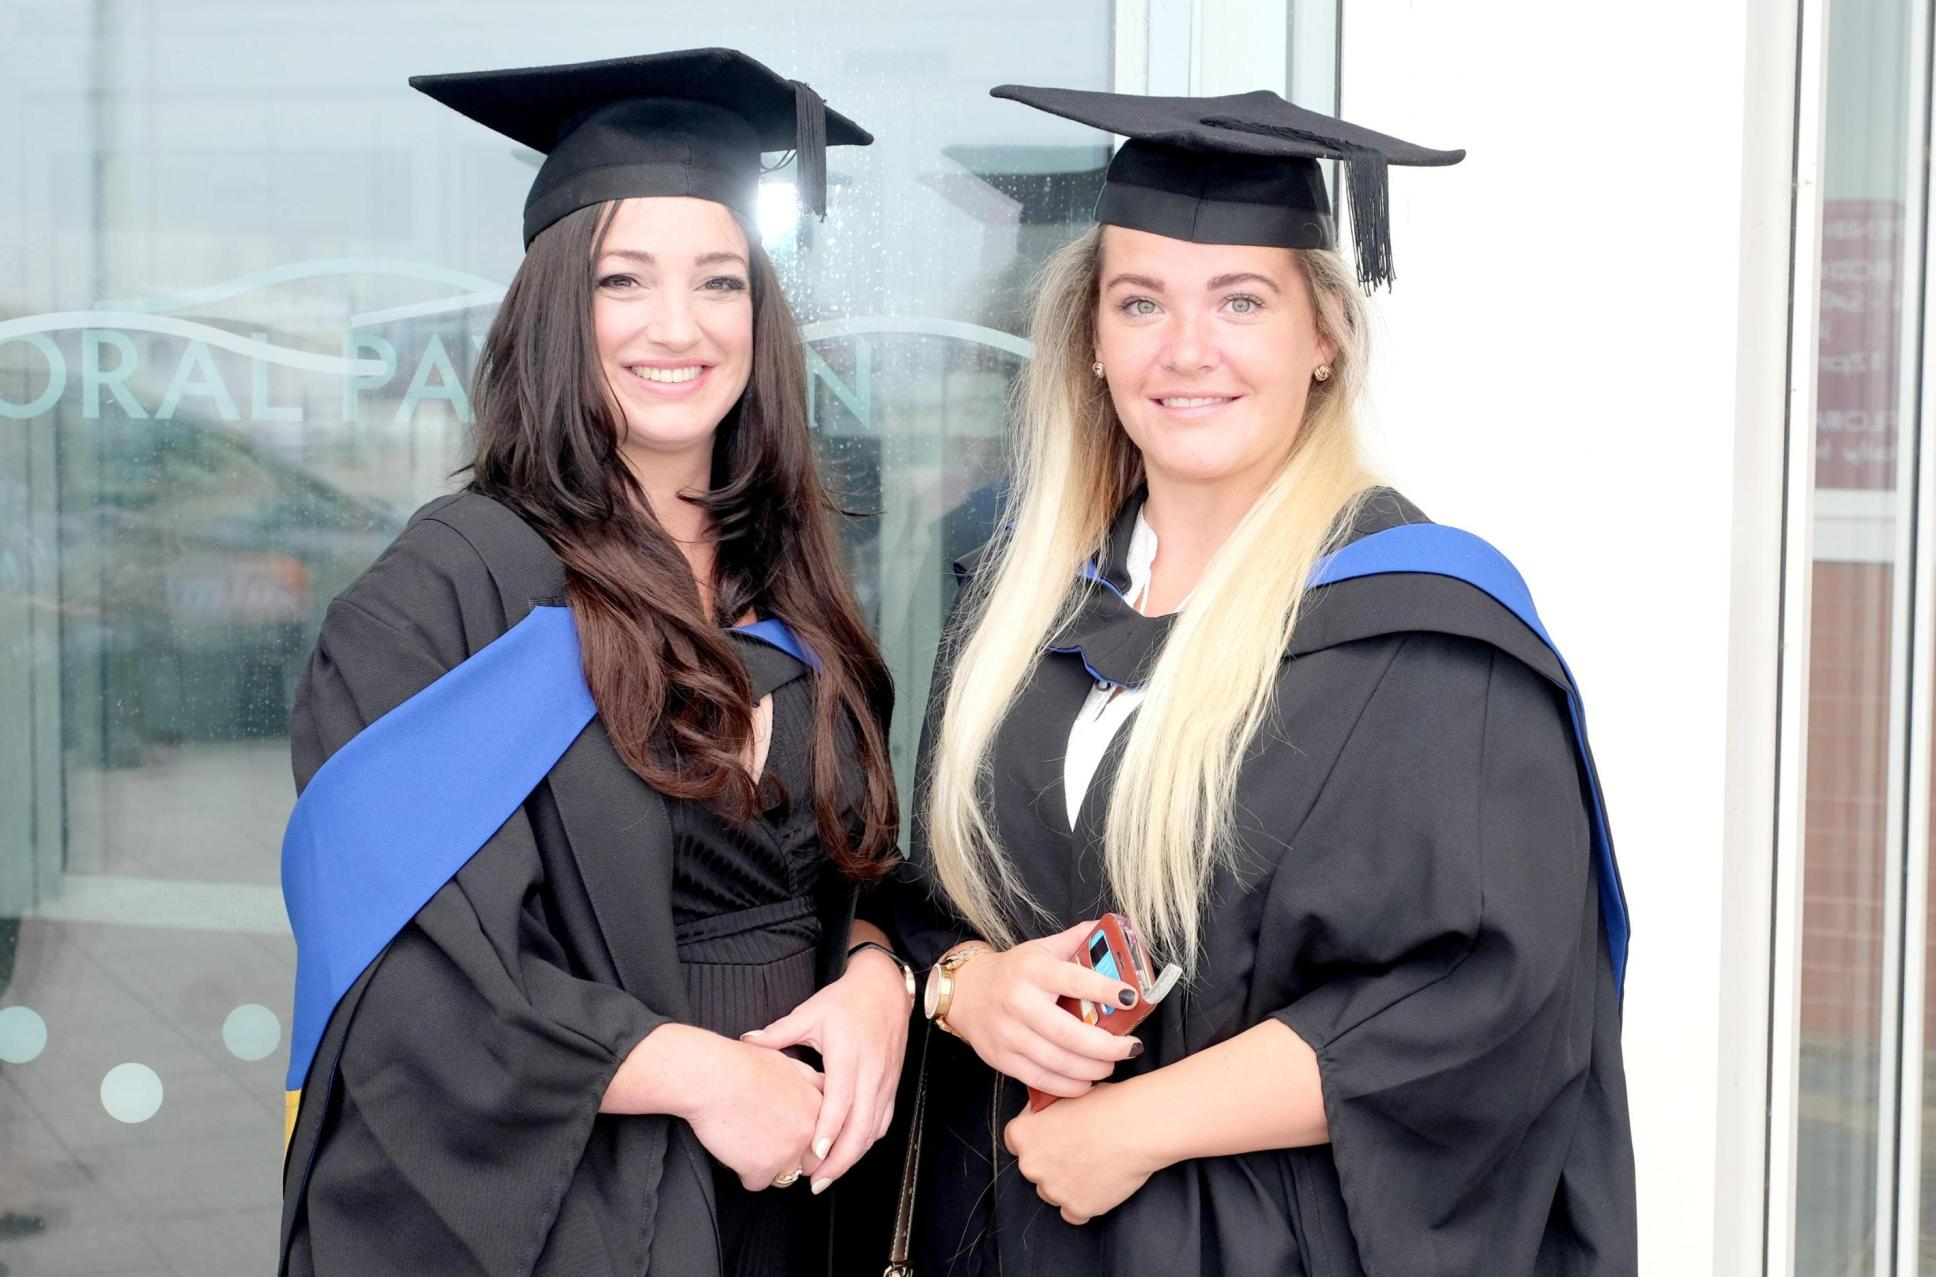 Two Female Wirral Met Higher Education Students wearing Graduation Gowns and Caps